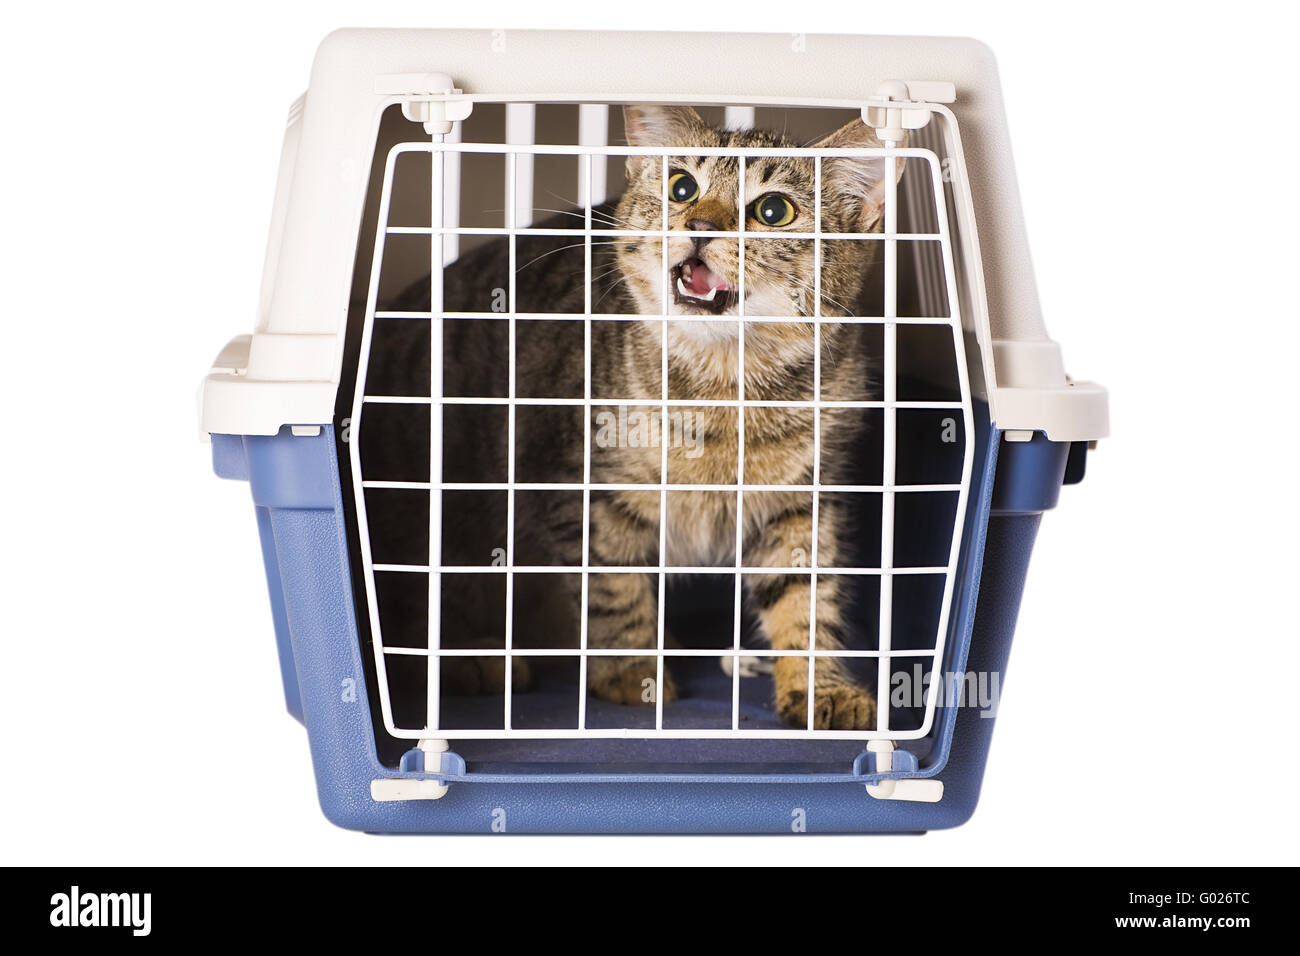 tiger cat in a cat cage Stock Photo